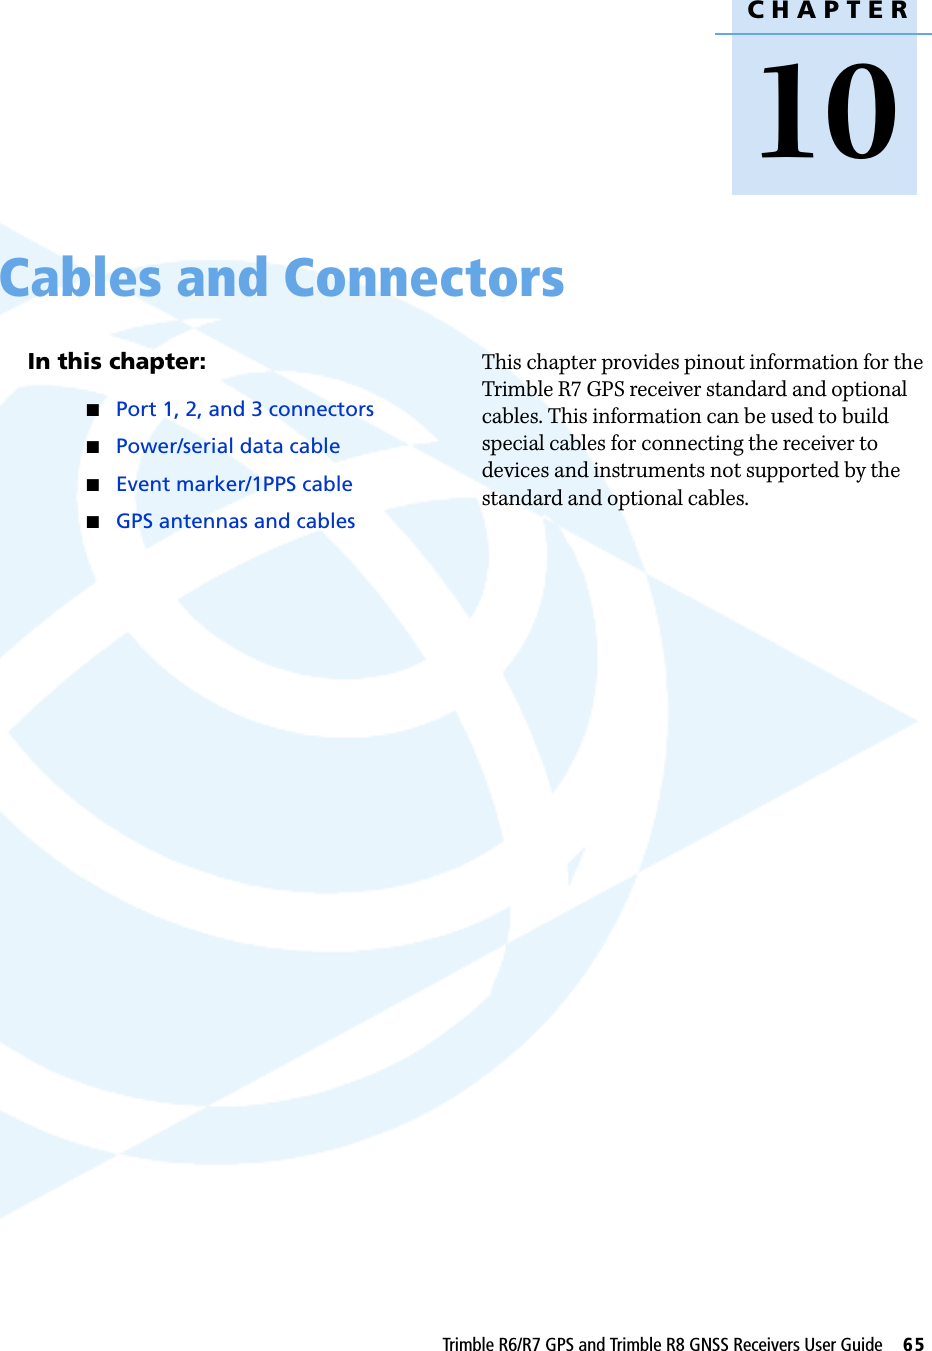 CHAPTER10Trimble R6/R7 GPS and Trimble R8 GNSS Receivers User Guide     65Cables and Connectors 10In this chapter:QPort 1, 2, and 3 connectorsQPower/serial data cableQEvent marker/1PPS cableQGPS antennas and cablesThis chapter provides pinout information for the Trimble R7 GPS receiver standard and optional cables. This information can be used to build special cables for connecting the receiver to devices and instruments not supported by the standard and optional cables.